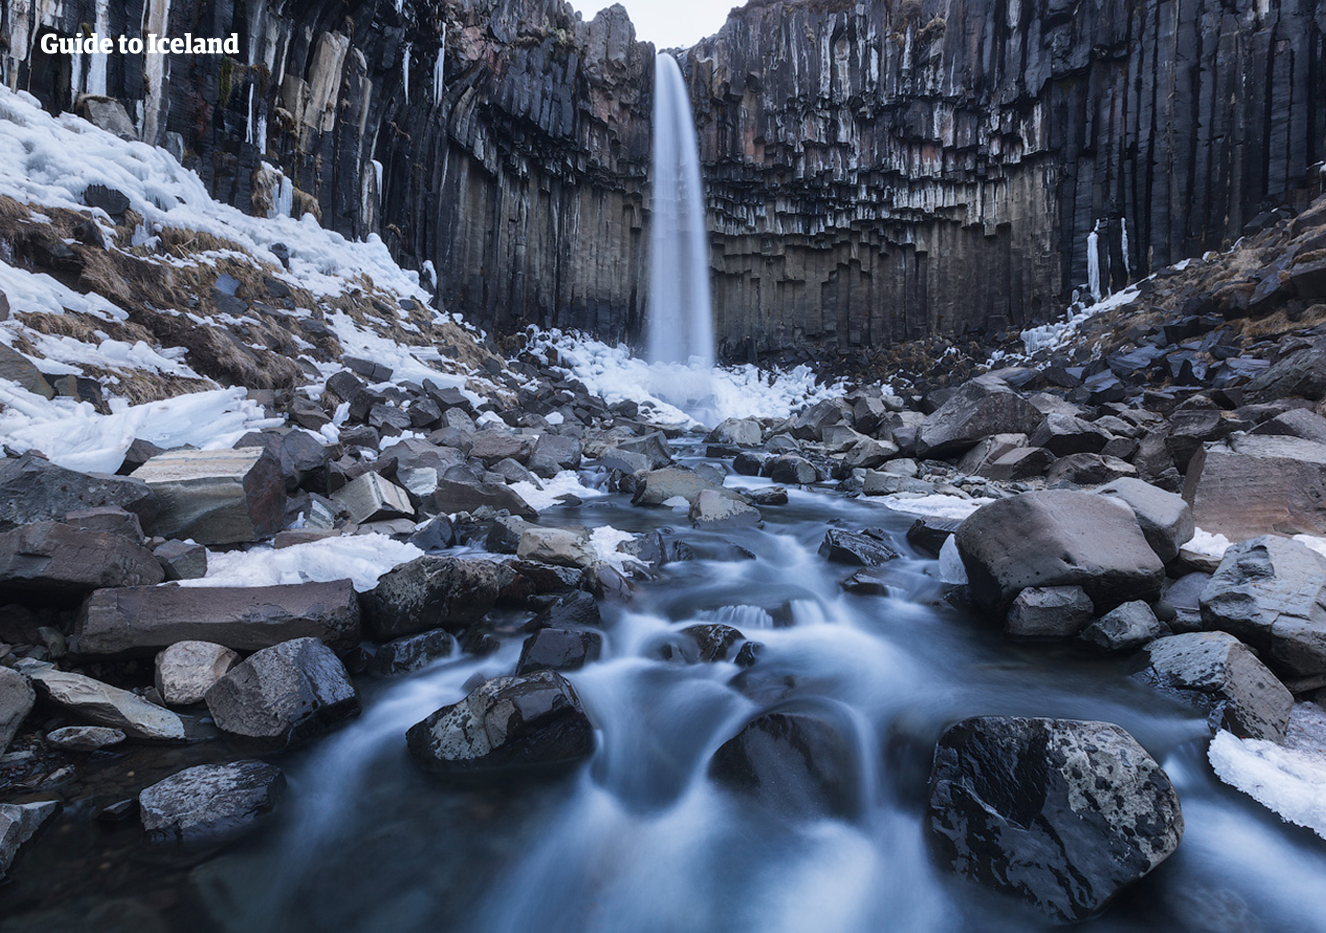 Hexagonal black columns surround Svartifoss waterfall in south Iceland, pictured here in winter.